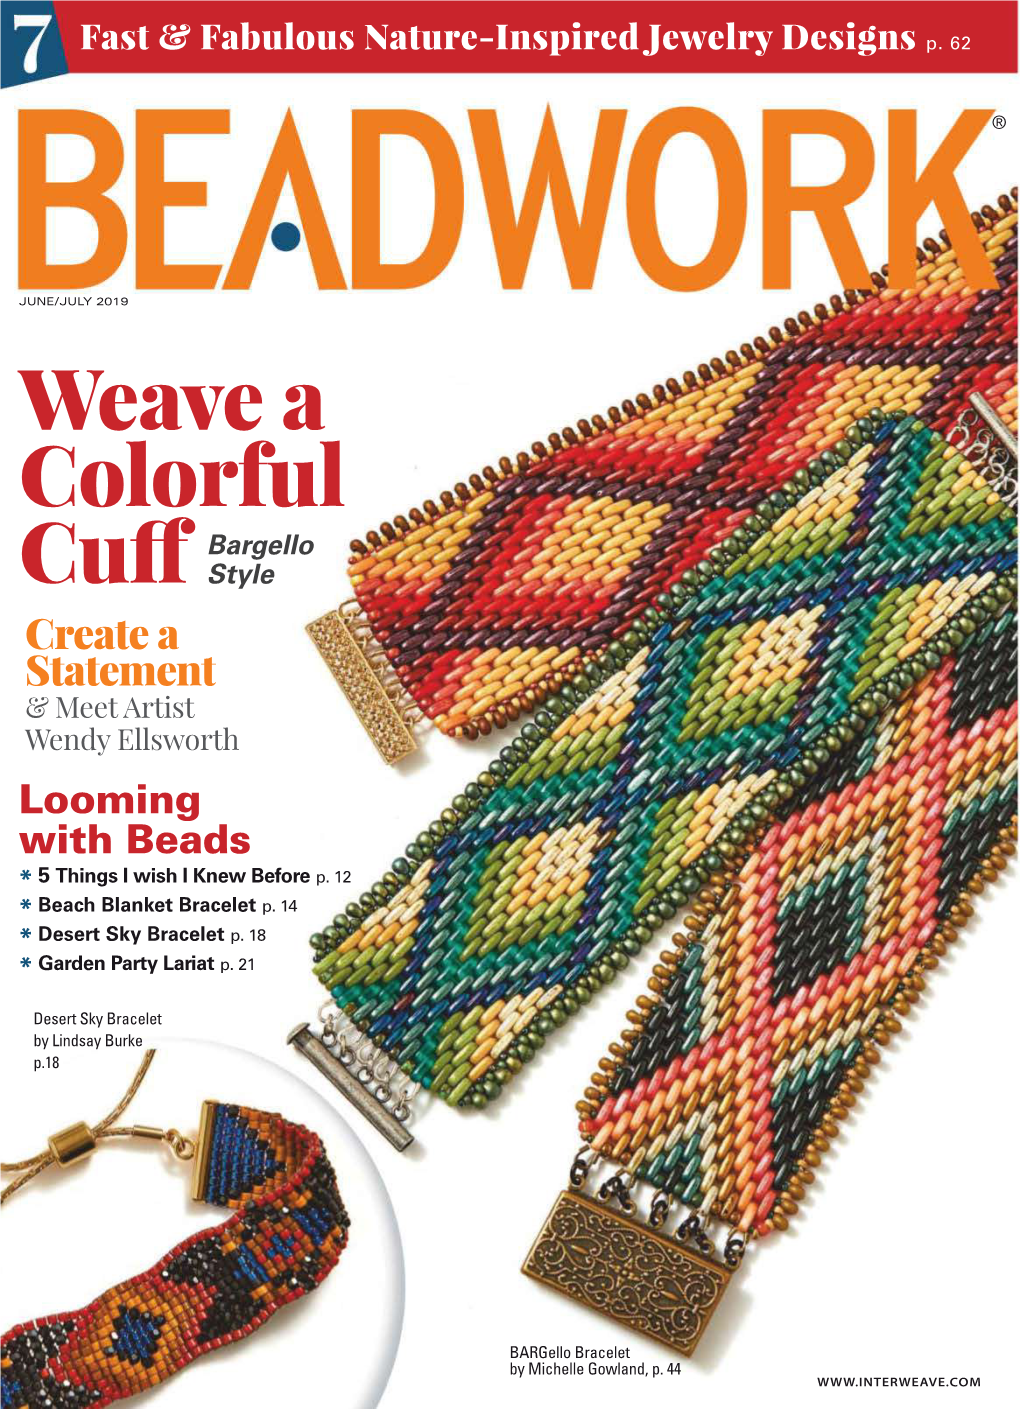 Stitch a Patchwork of Color Using Only Seed Beads